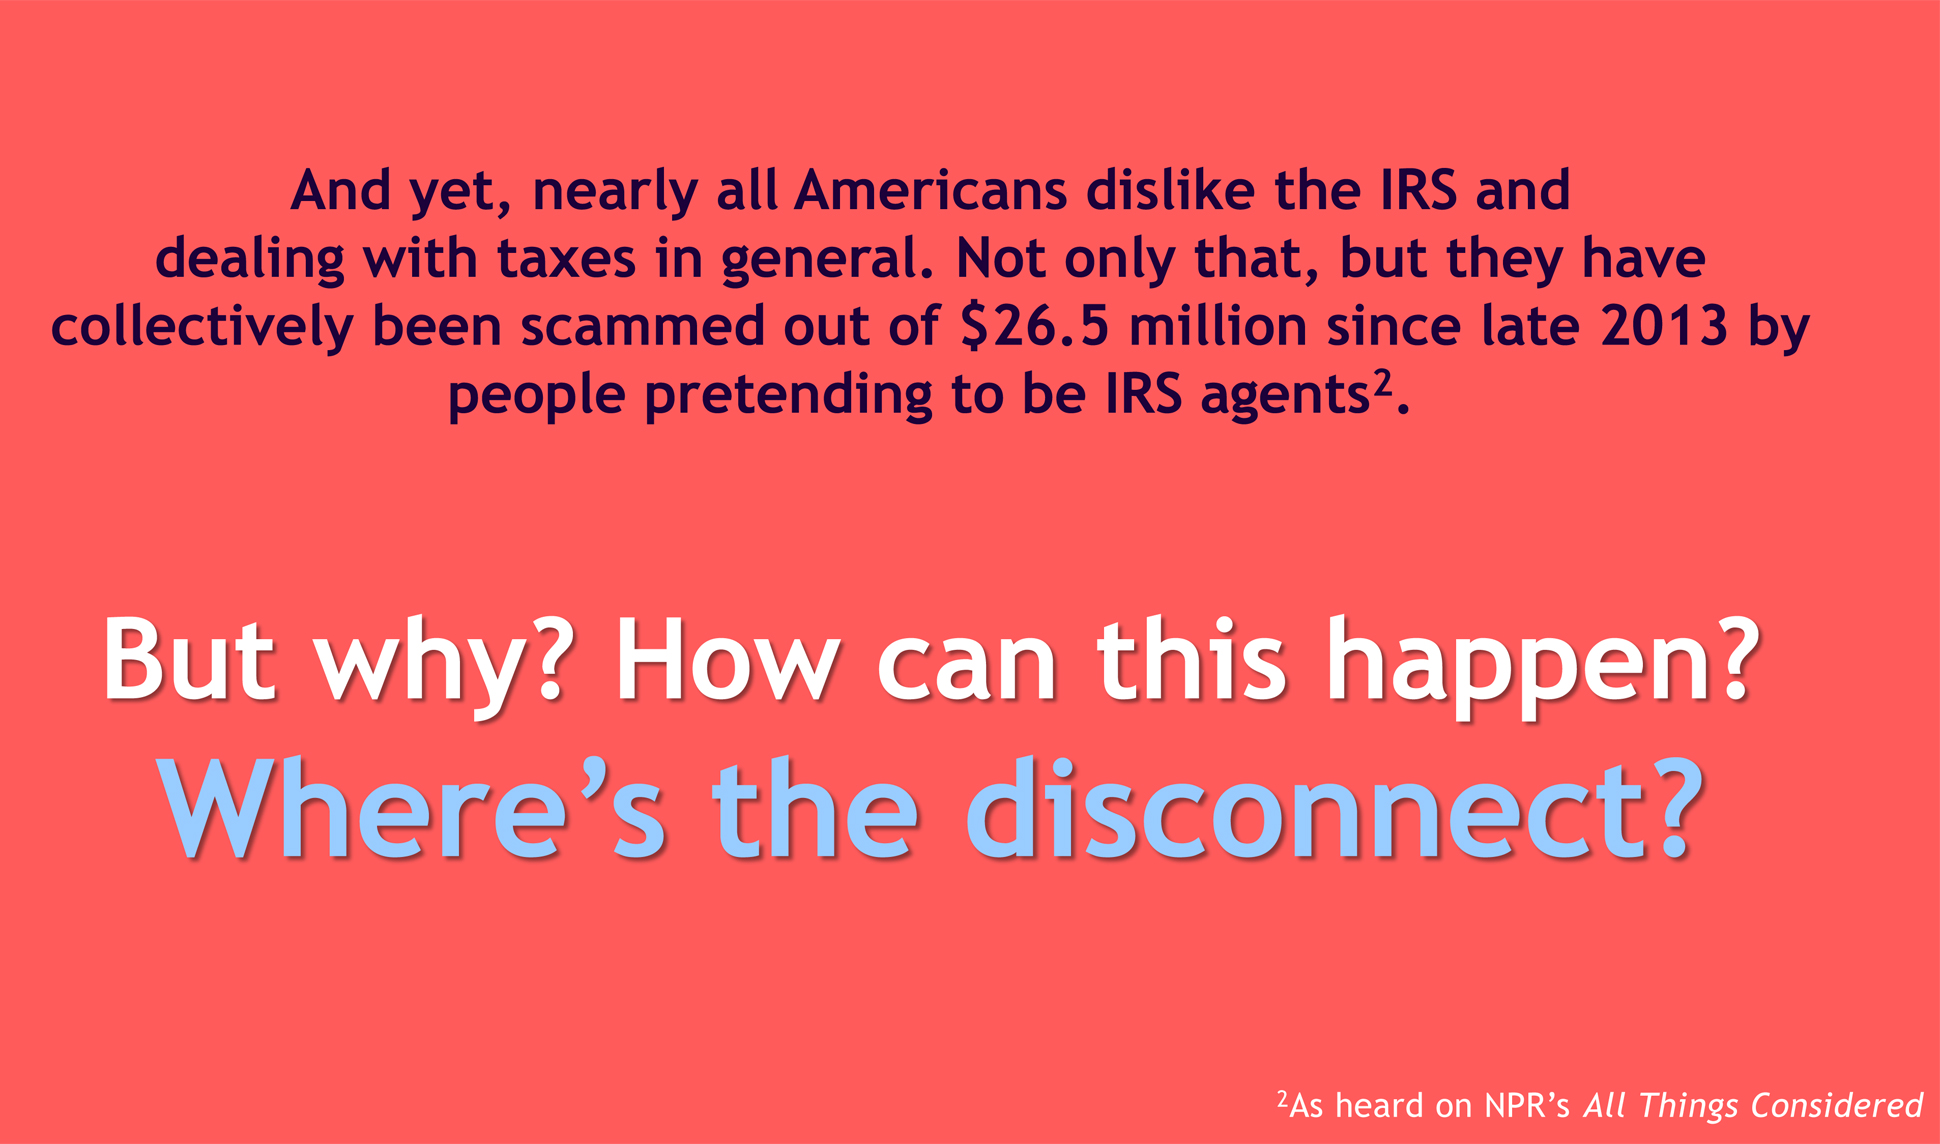 A page from a tax design challenge submission. Information regarding why people dislike the IRS is provided.